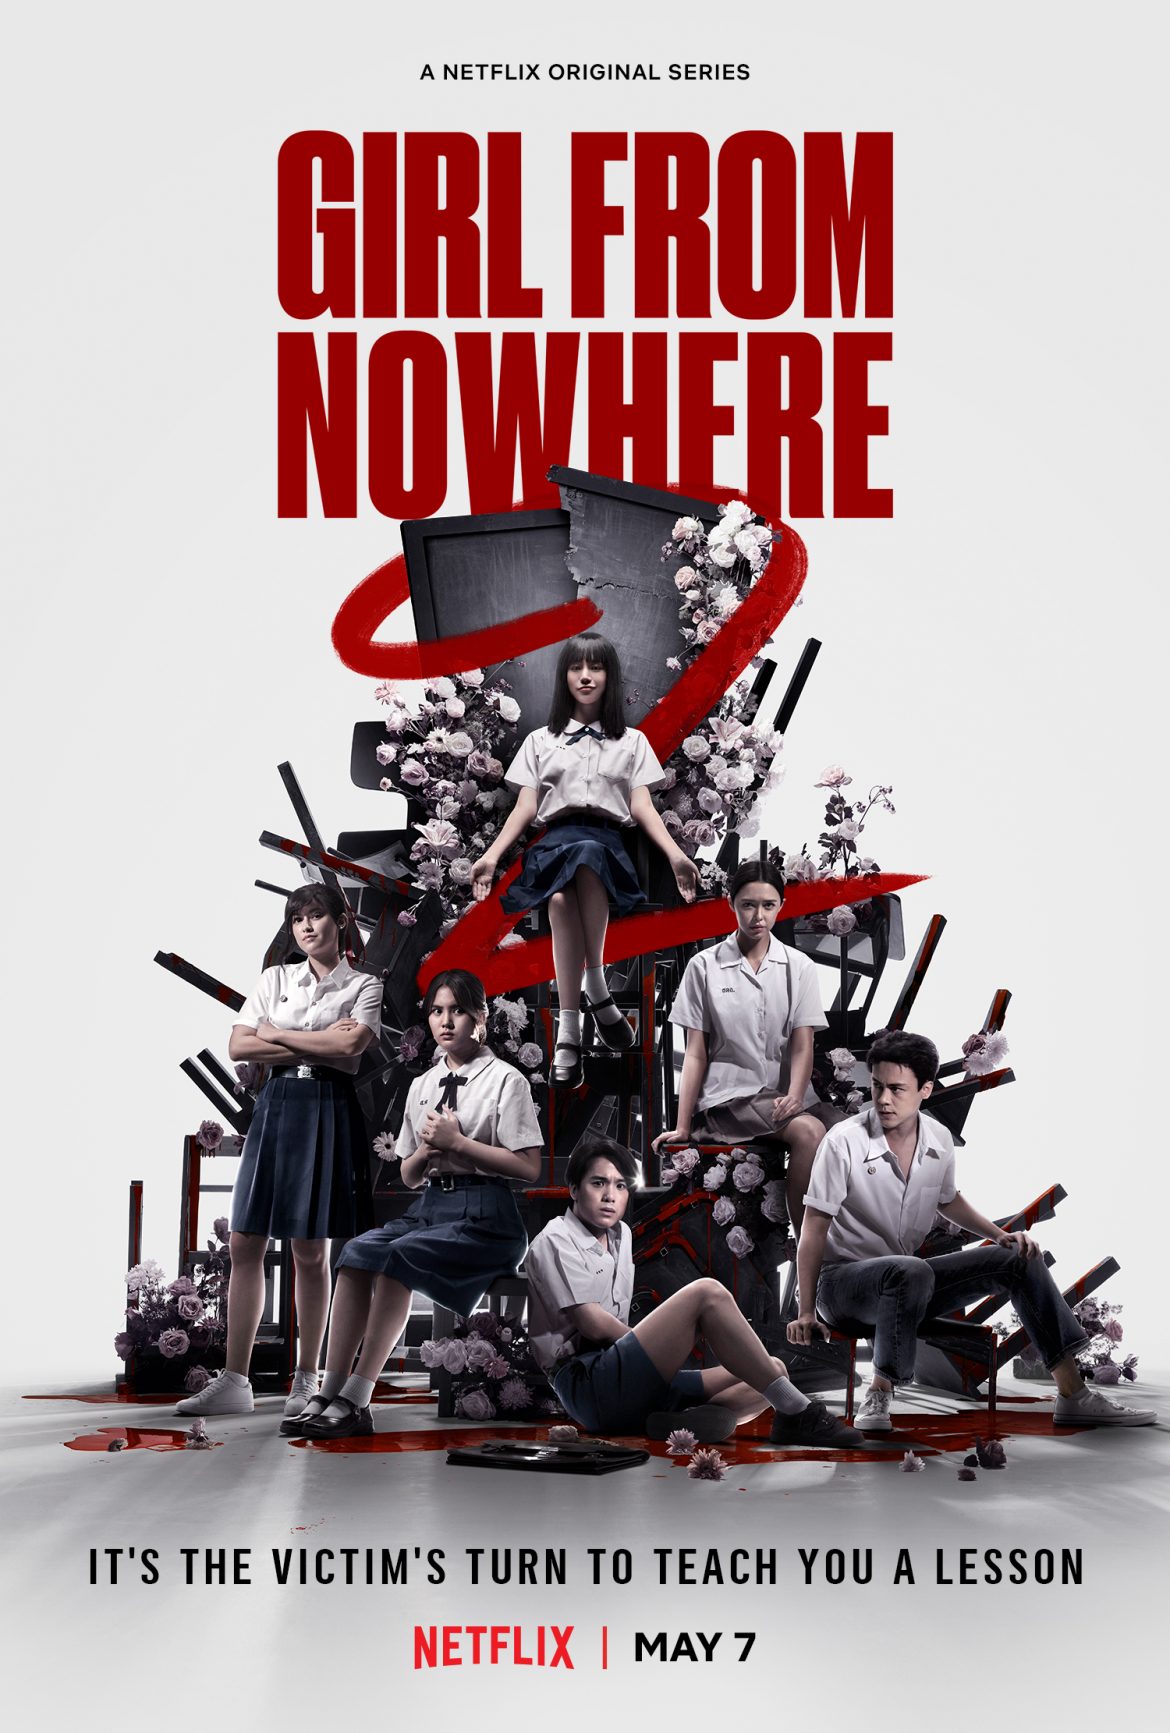 The Official Trailer for Girl From Nowhere Season 2 is Out!